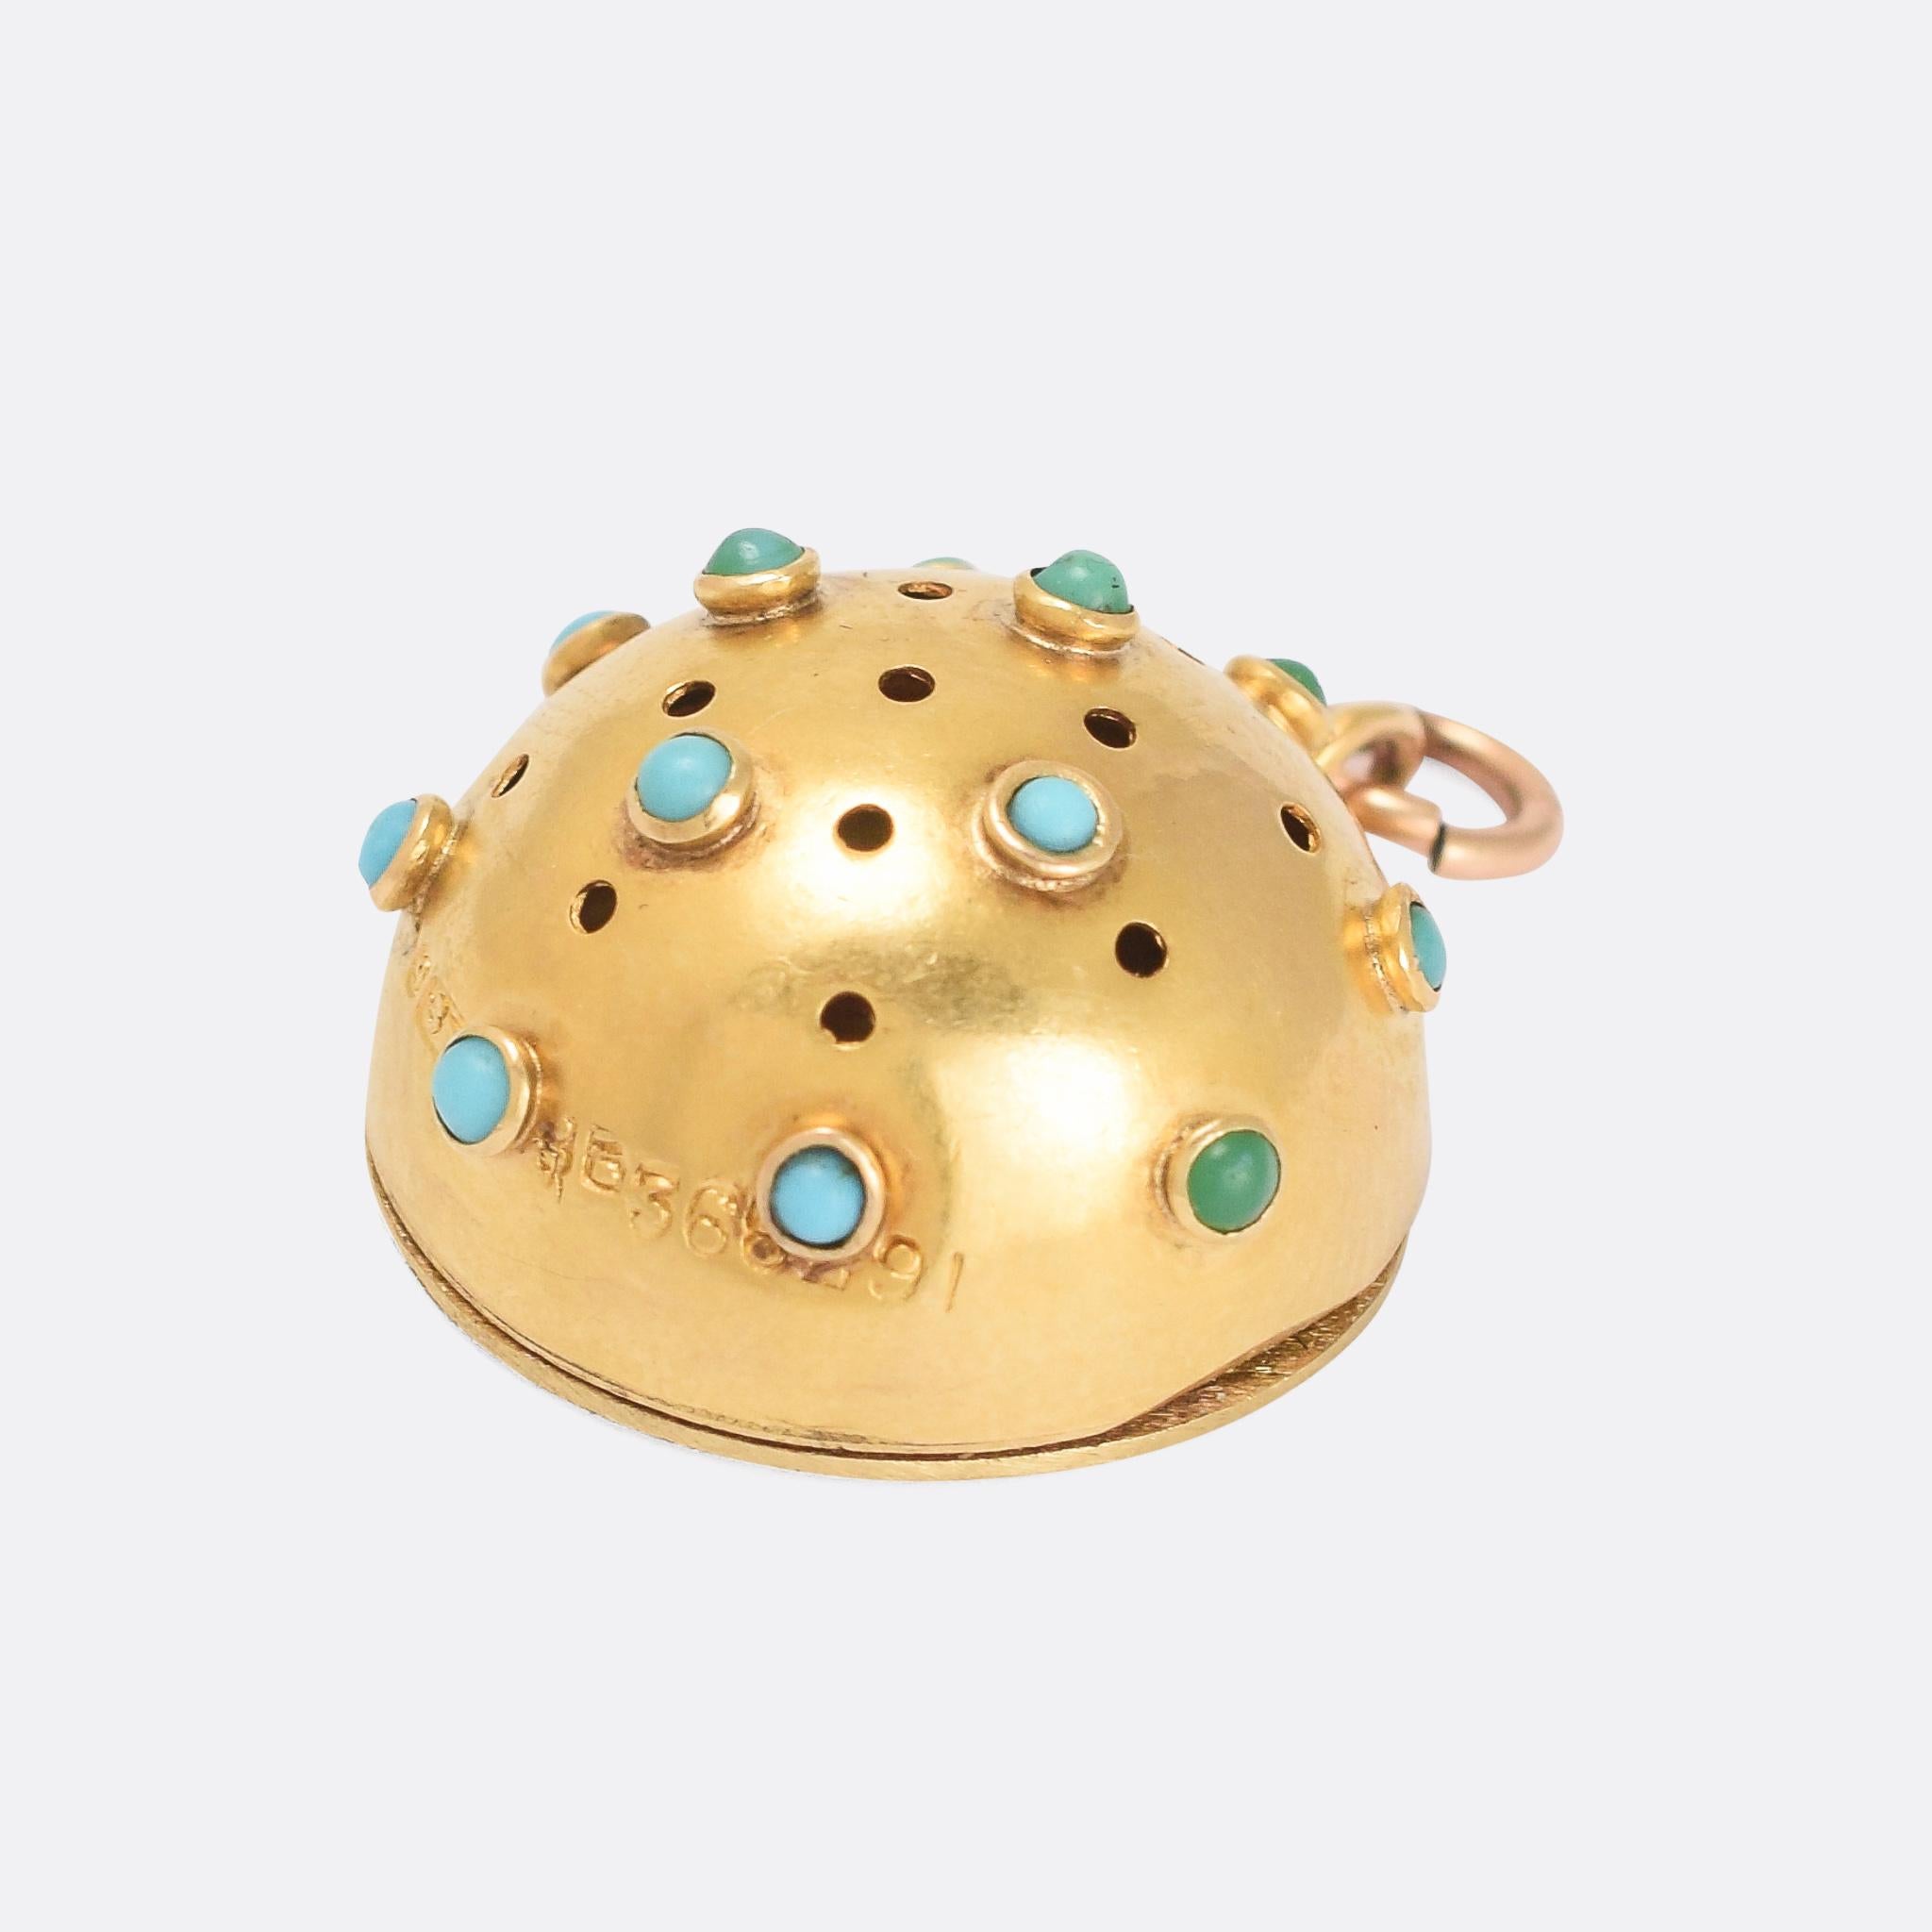 A cool Victorian vinaigrette pendant modelled as a hemisphere and studded with turquoise cabochons. The back opens to store a scent-soaked piece of fabric or foam and the front features tiny little holes, allowing the wearer to disguise unpleasant